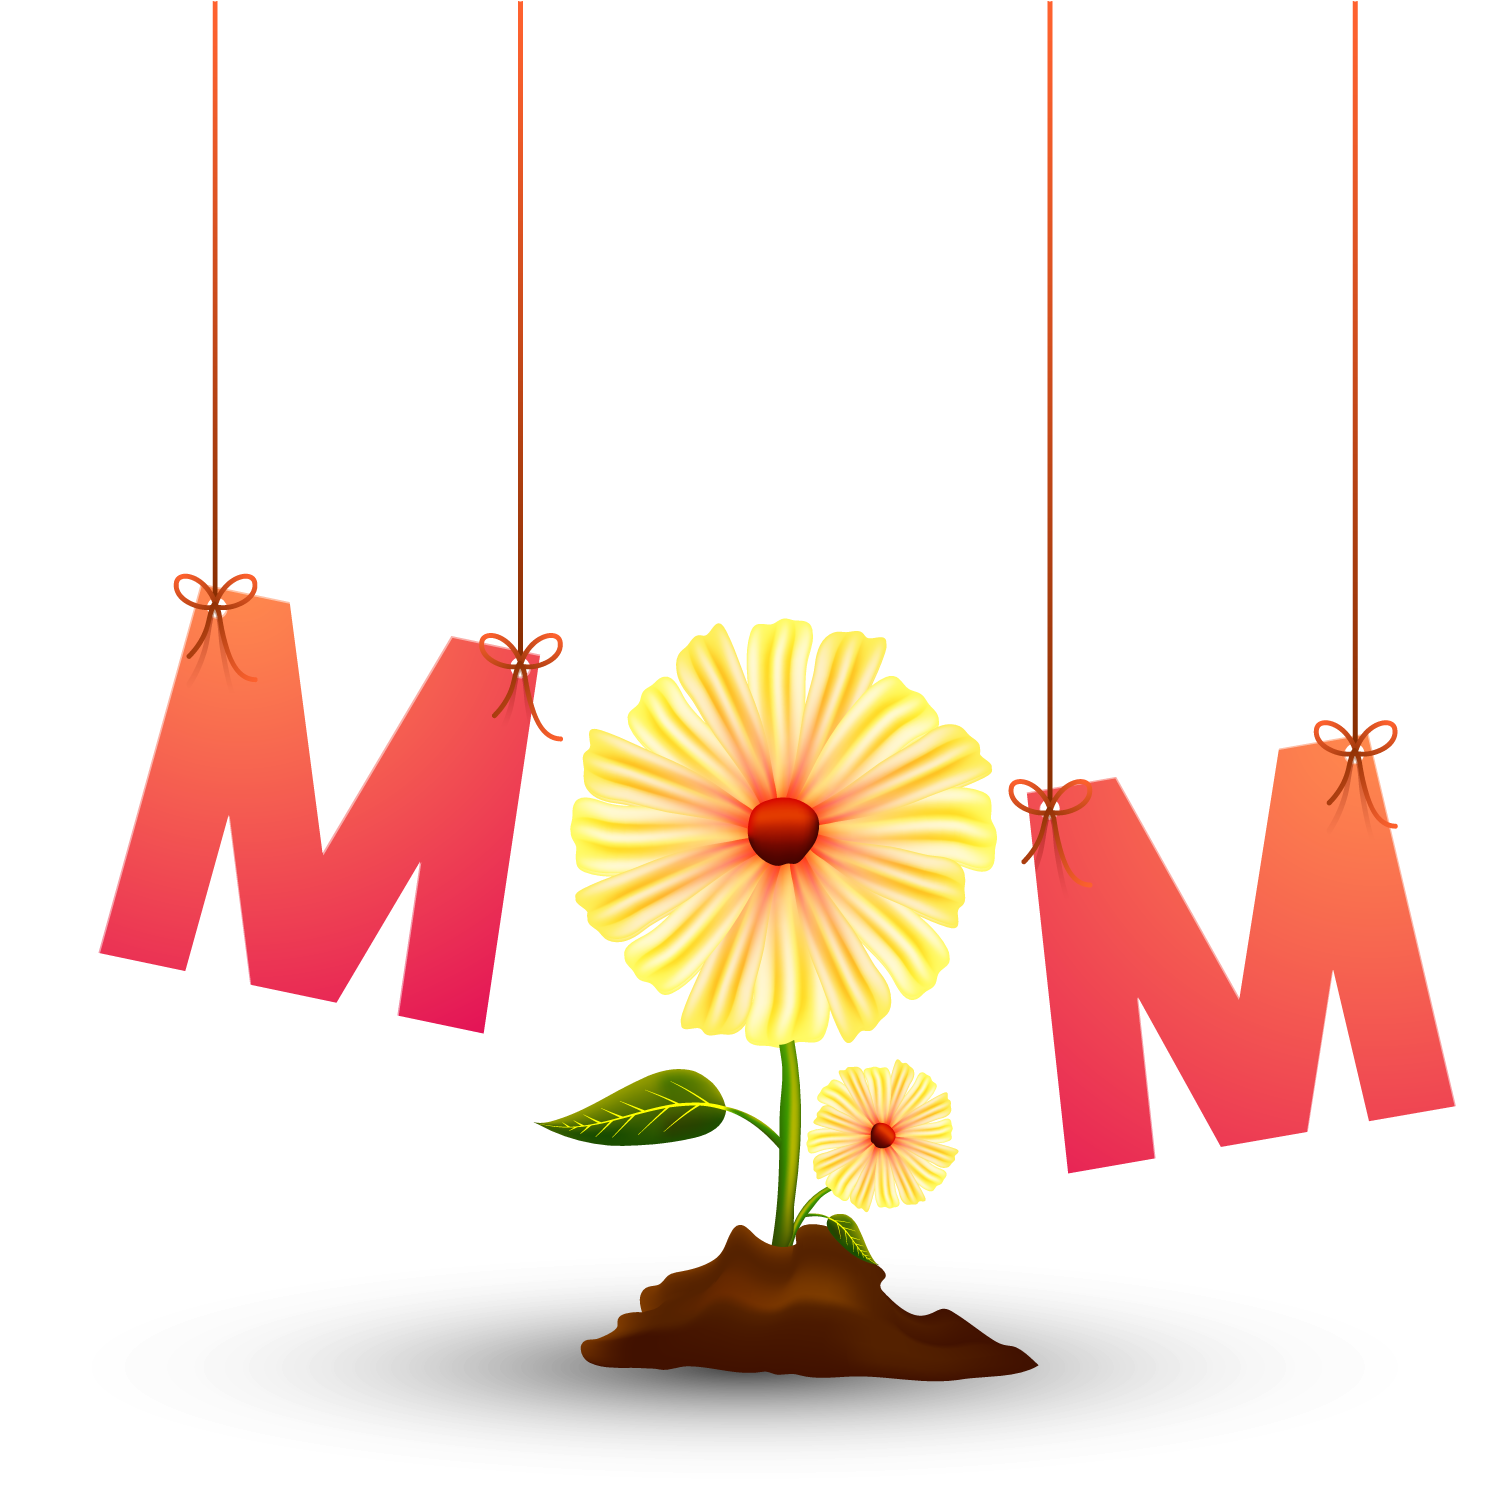 Mother's Day Teachers' Day Mothering Sunday - Mother's Day Teachers' Day Mothering Sunday (1500x1500)